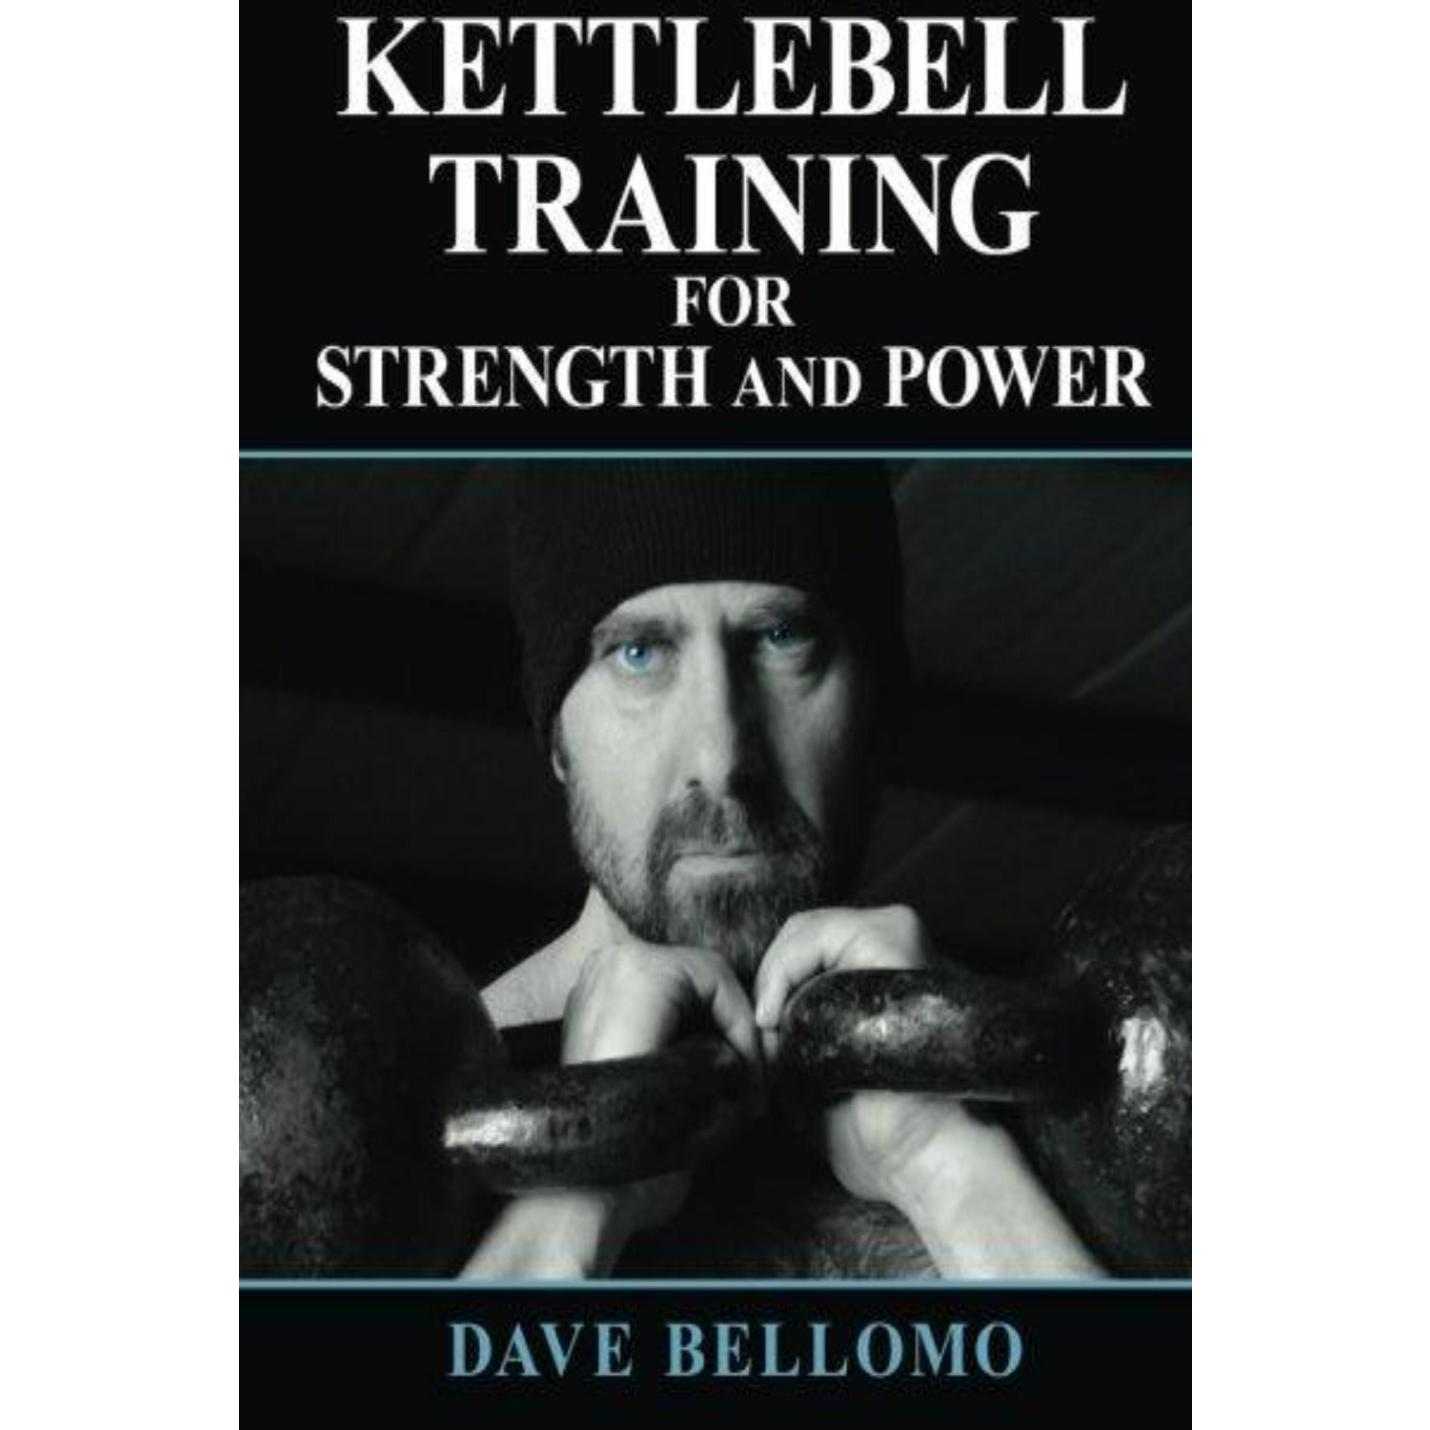 Kettlebell Training: For Strength and Power - happygetfit.com